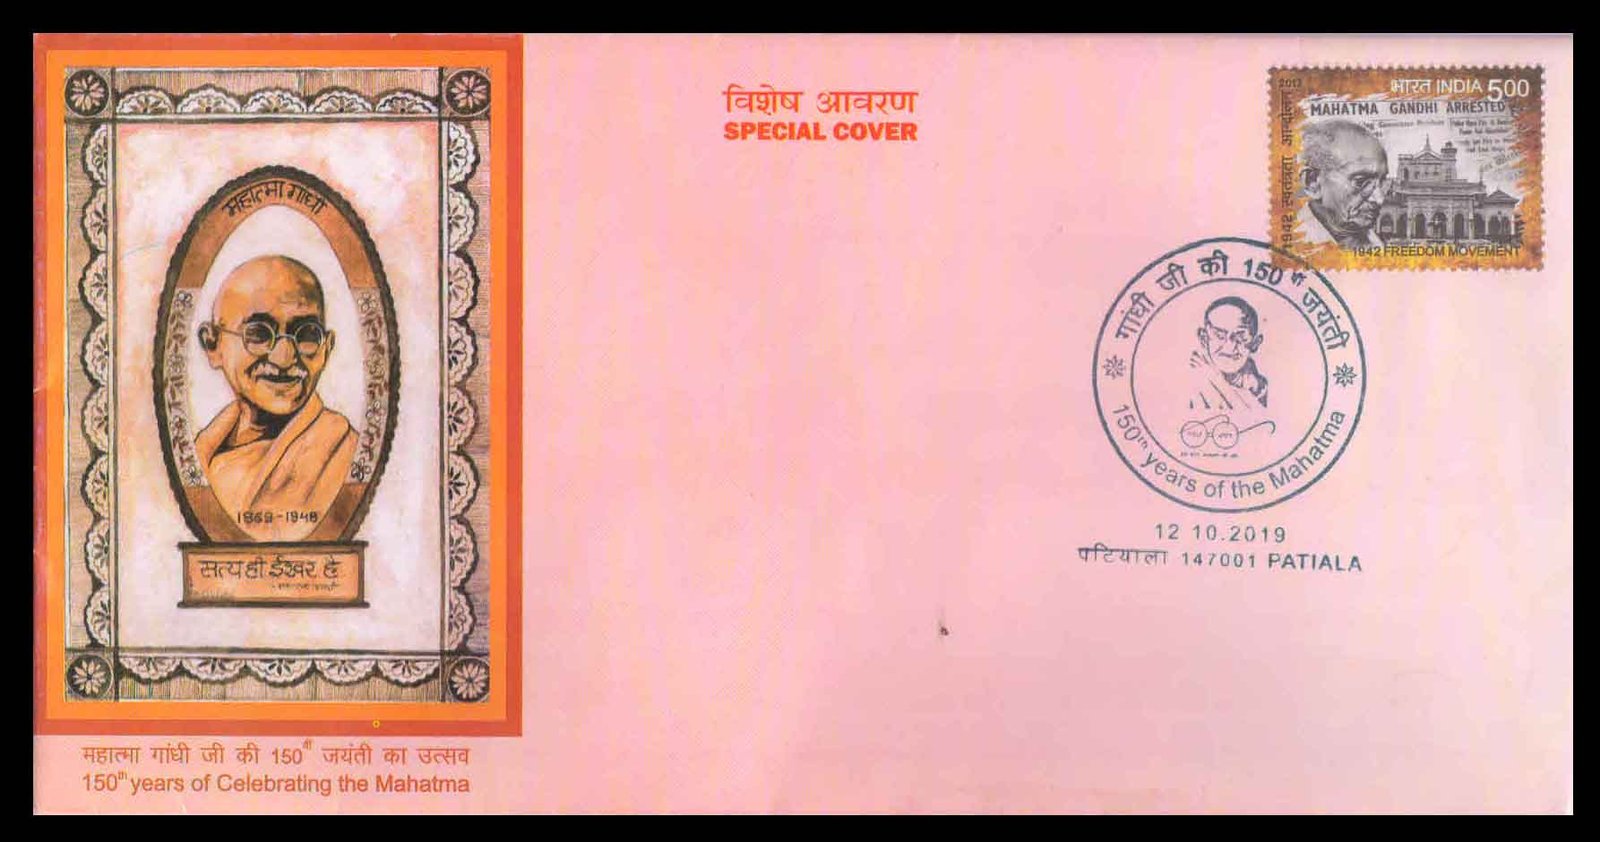 INDIA 2019, 150th Years of the Mahatma Gandhi, Special Cover, Patiala